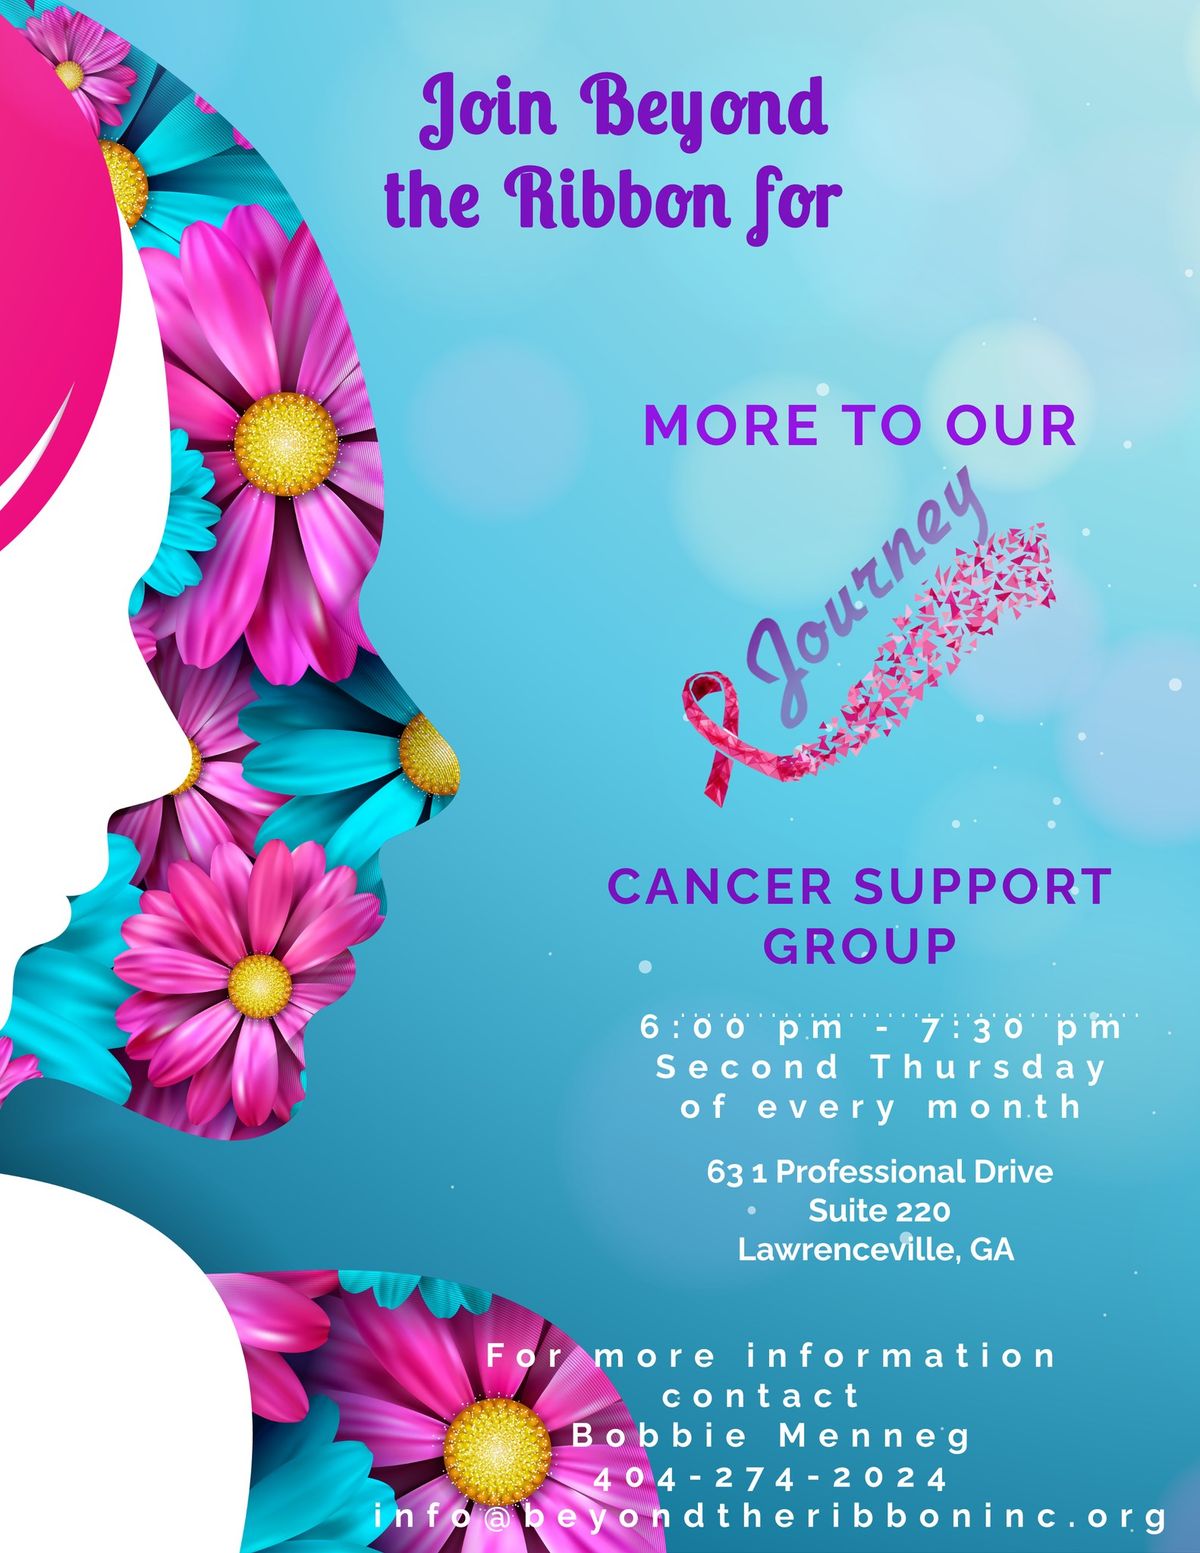 More to our Journey Cancer Support Group